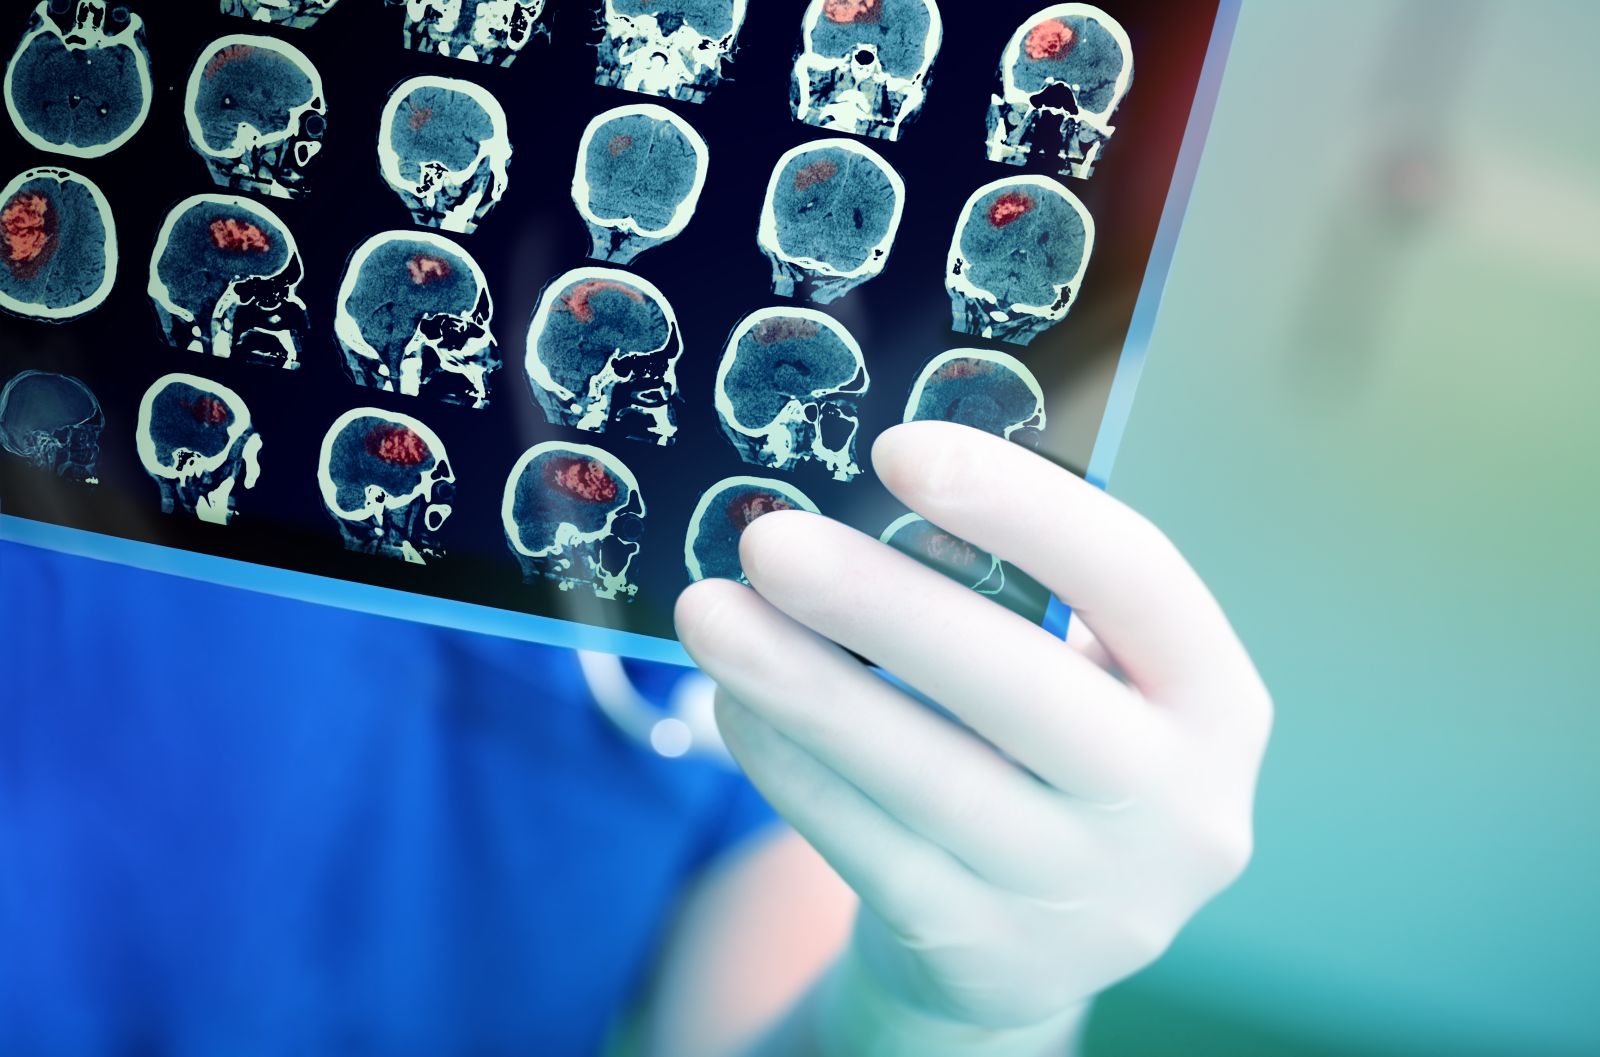 New study connects increased risk of stroke in younger people to Covid-19. Photo by Shutterstock